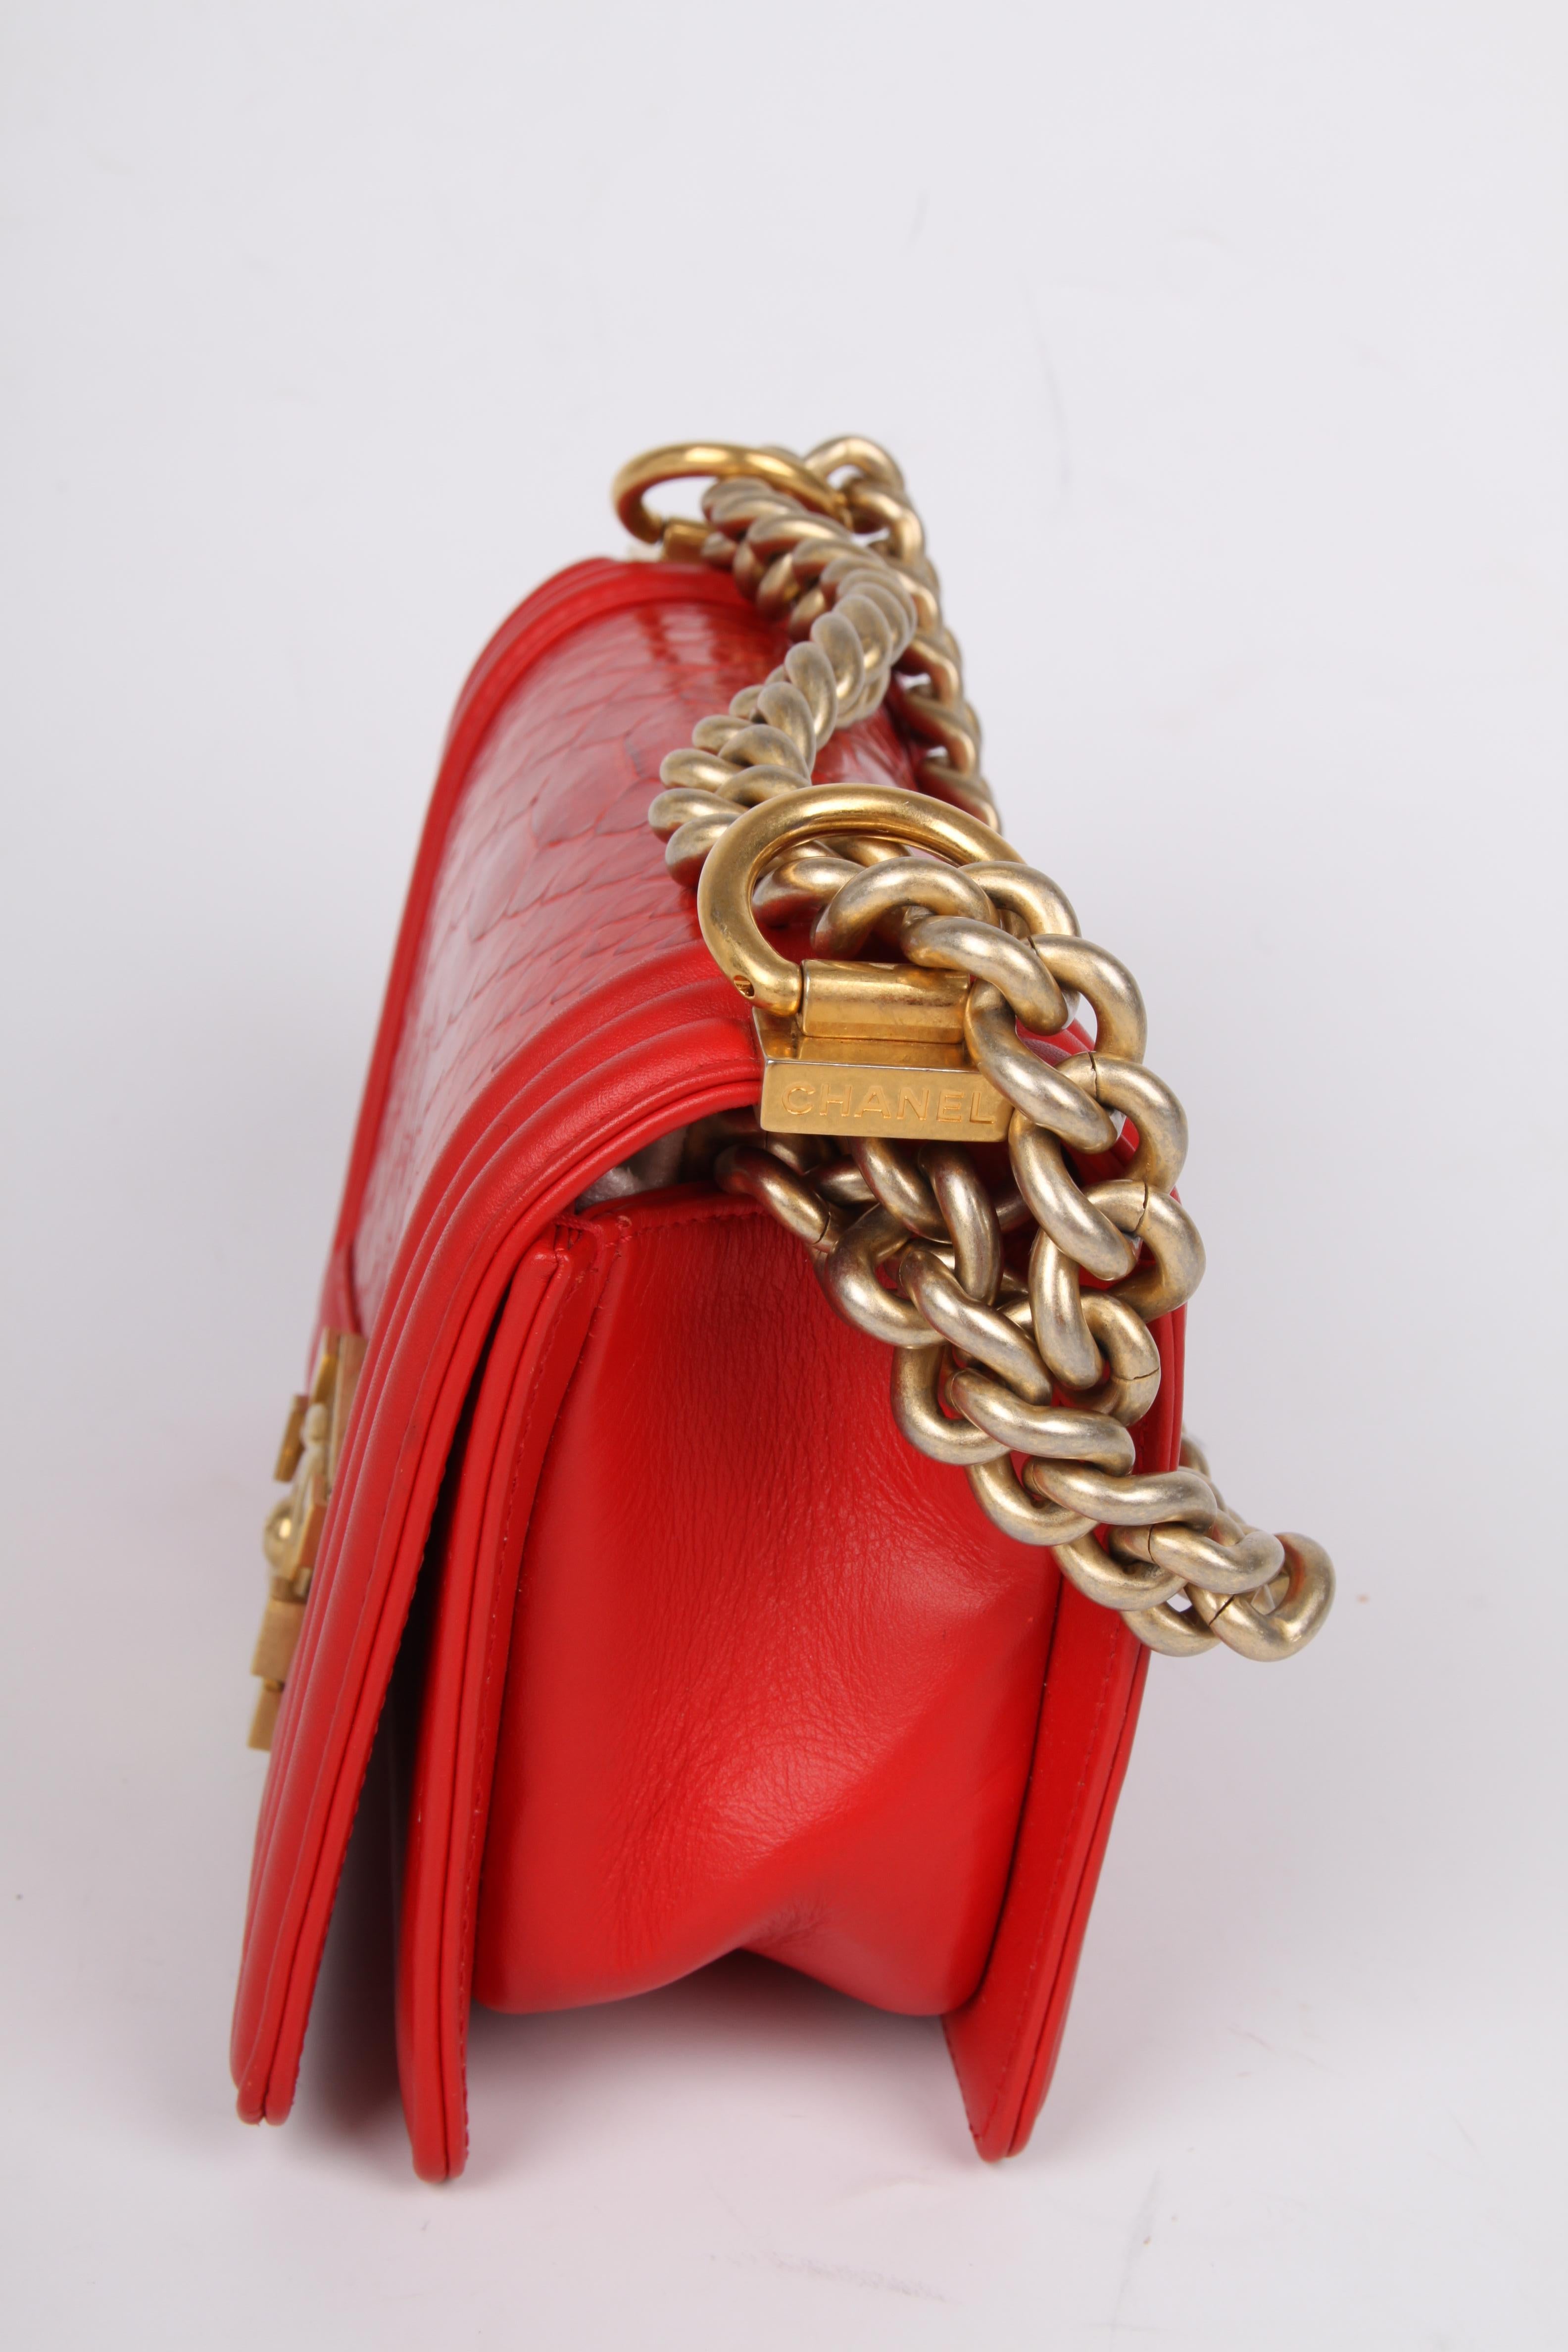   Chanel Quilted Lambskin & Python Le Boy Bag Mini - red    1